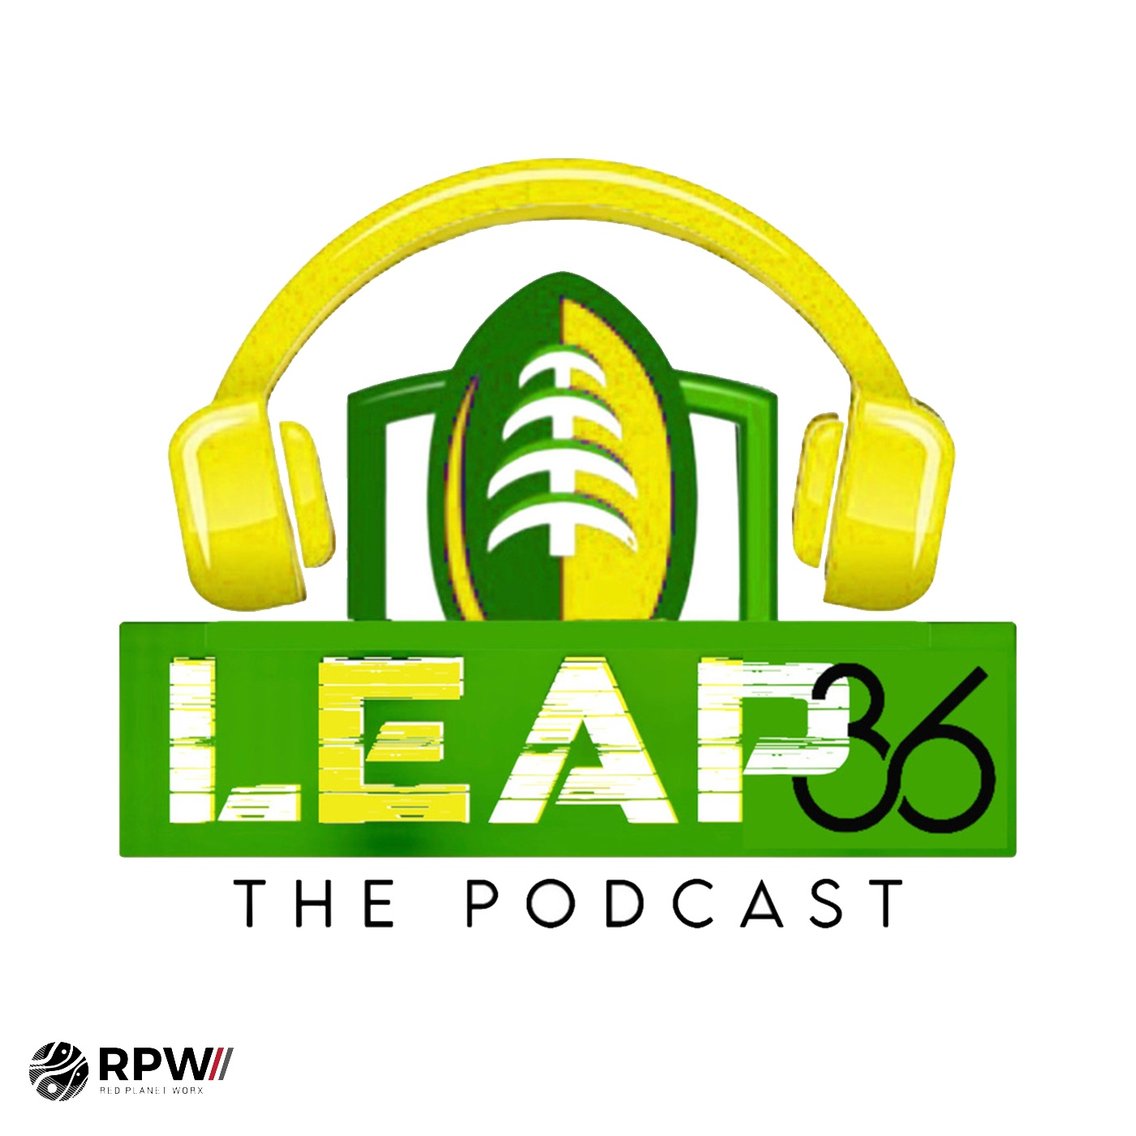 Leap 36 Podcast featuring LeRoy Butler & Gary Ellerson - Cover Image